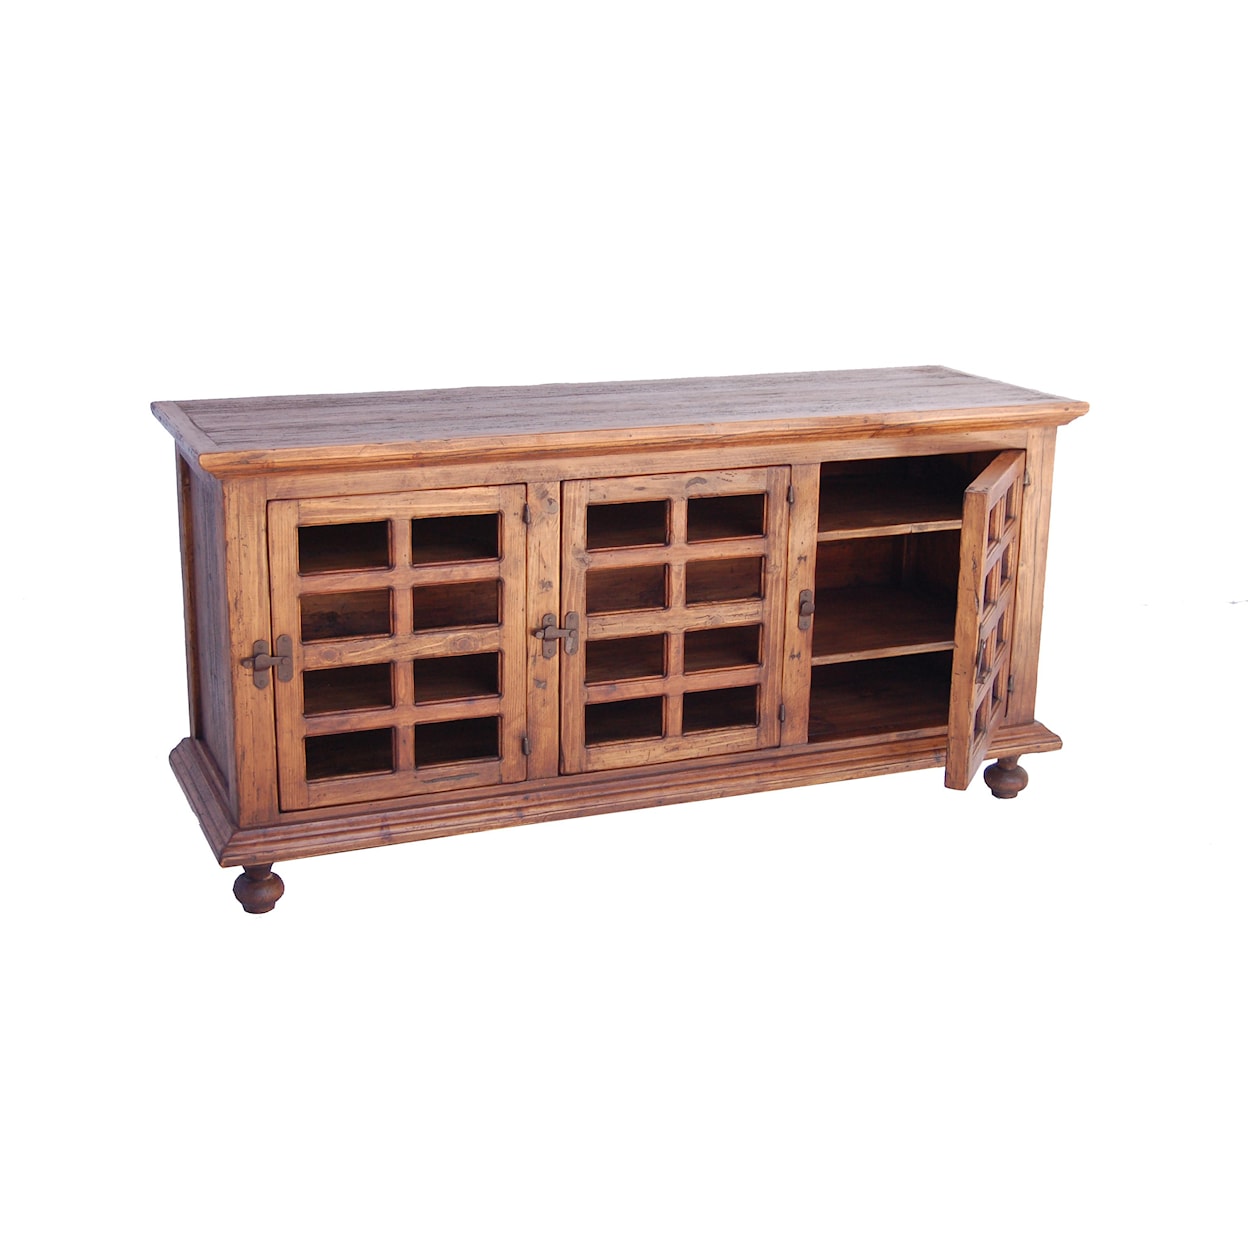 Furniture Source International Occasional Tables Media Cabinet